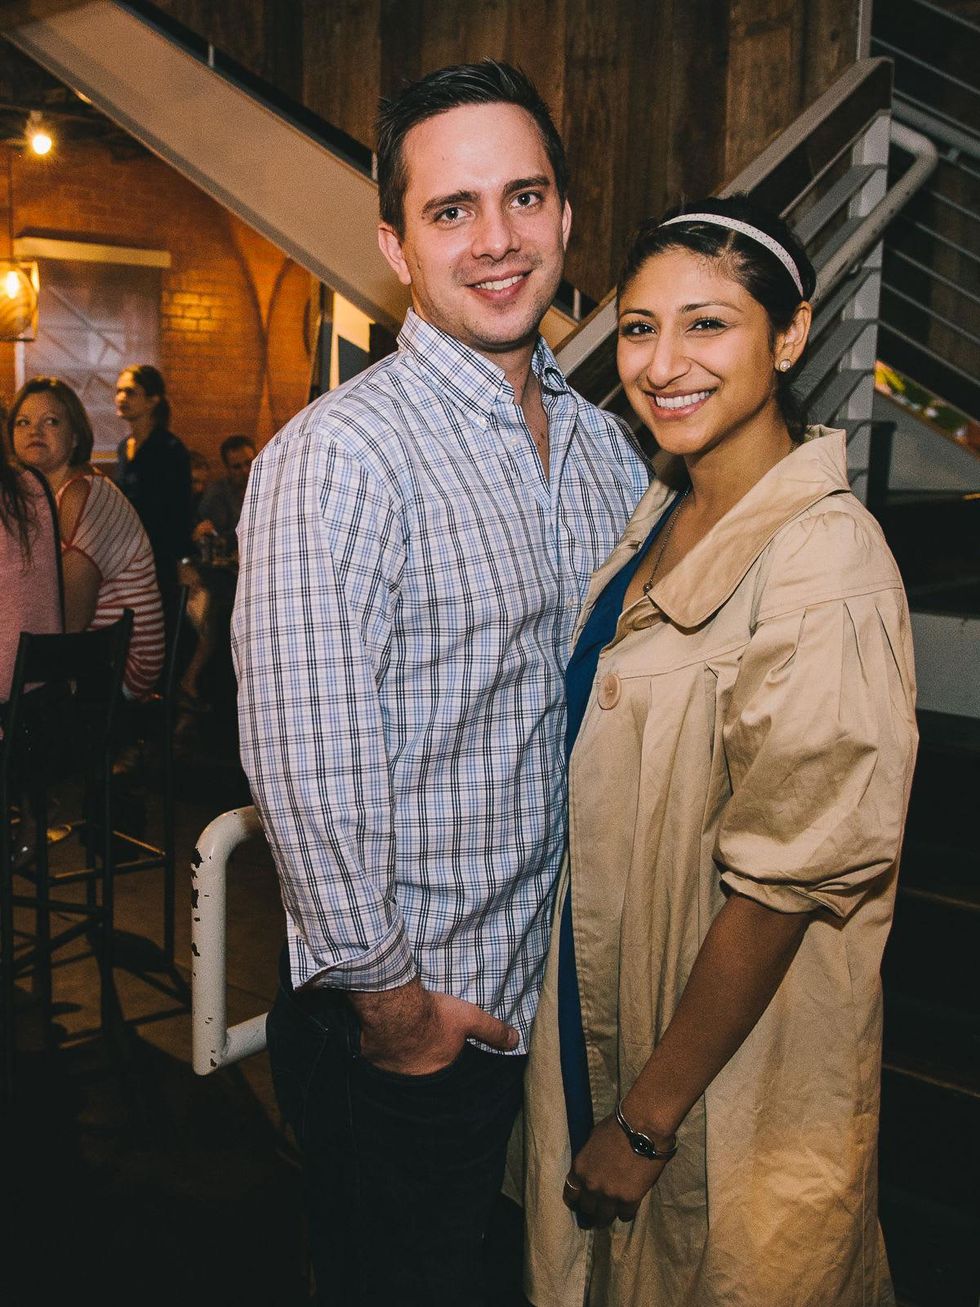 11 Dominic Farino and Annie Rupano at Dine Around Houston at Sparrow Bar & Cookshop